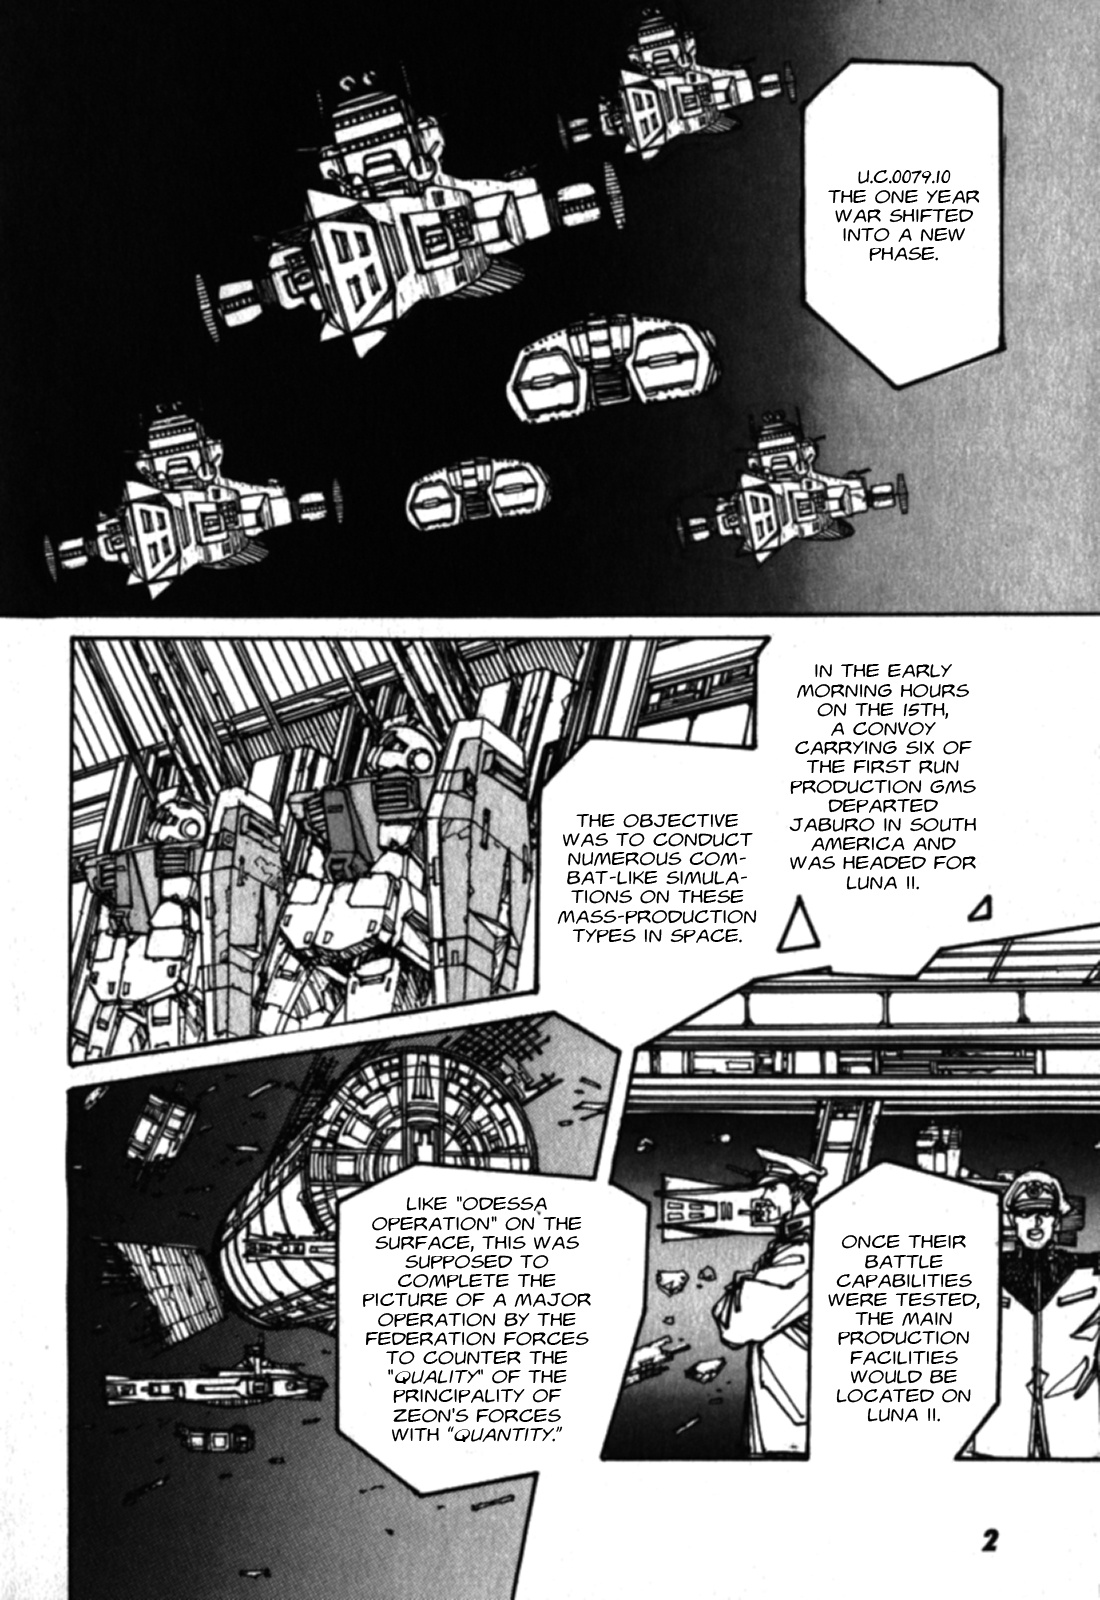 Gundam Pilot Series Of Biographies - The Brave Soldiers In The Sky - Page 3